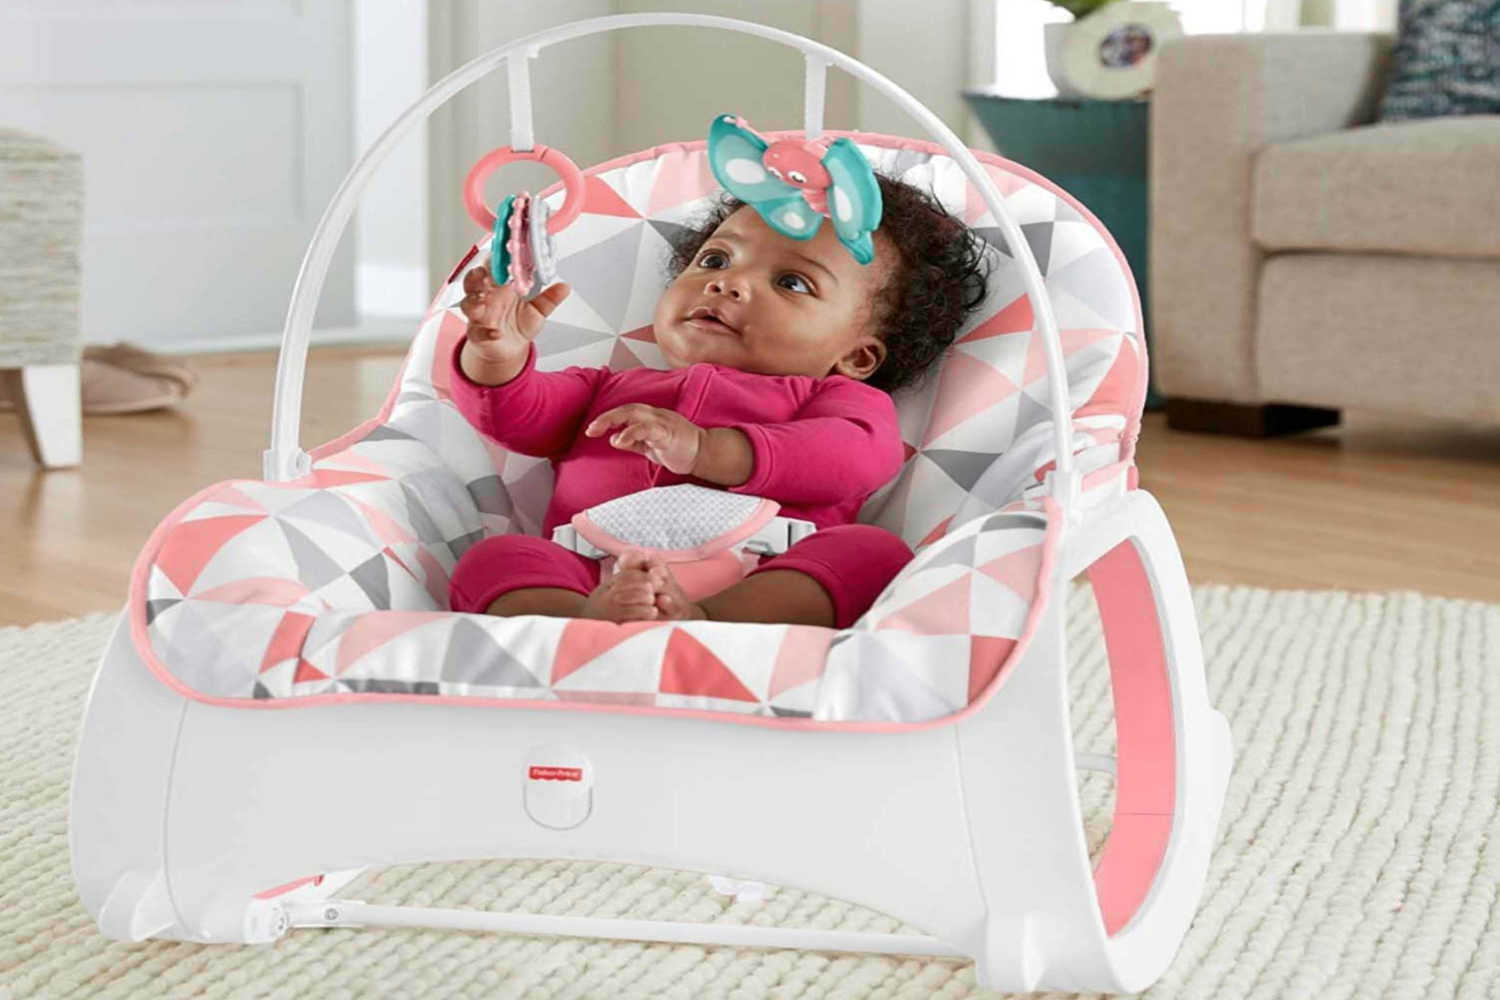 Fisher-Price Infant to Toddler Baby Rocker